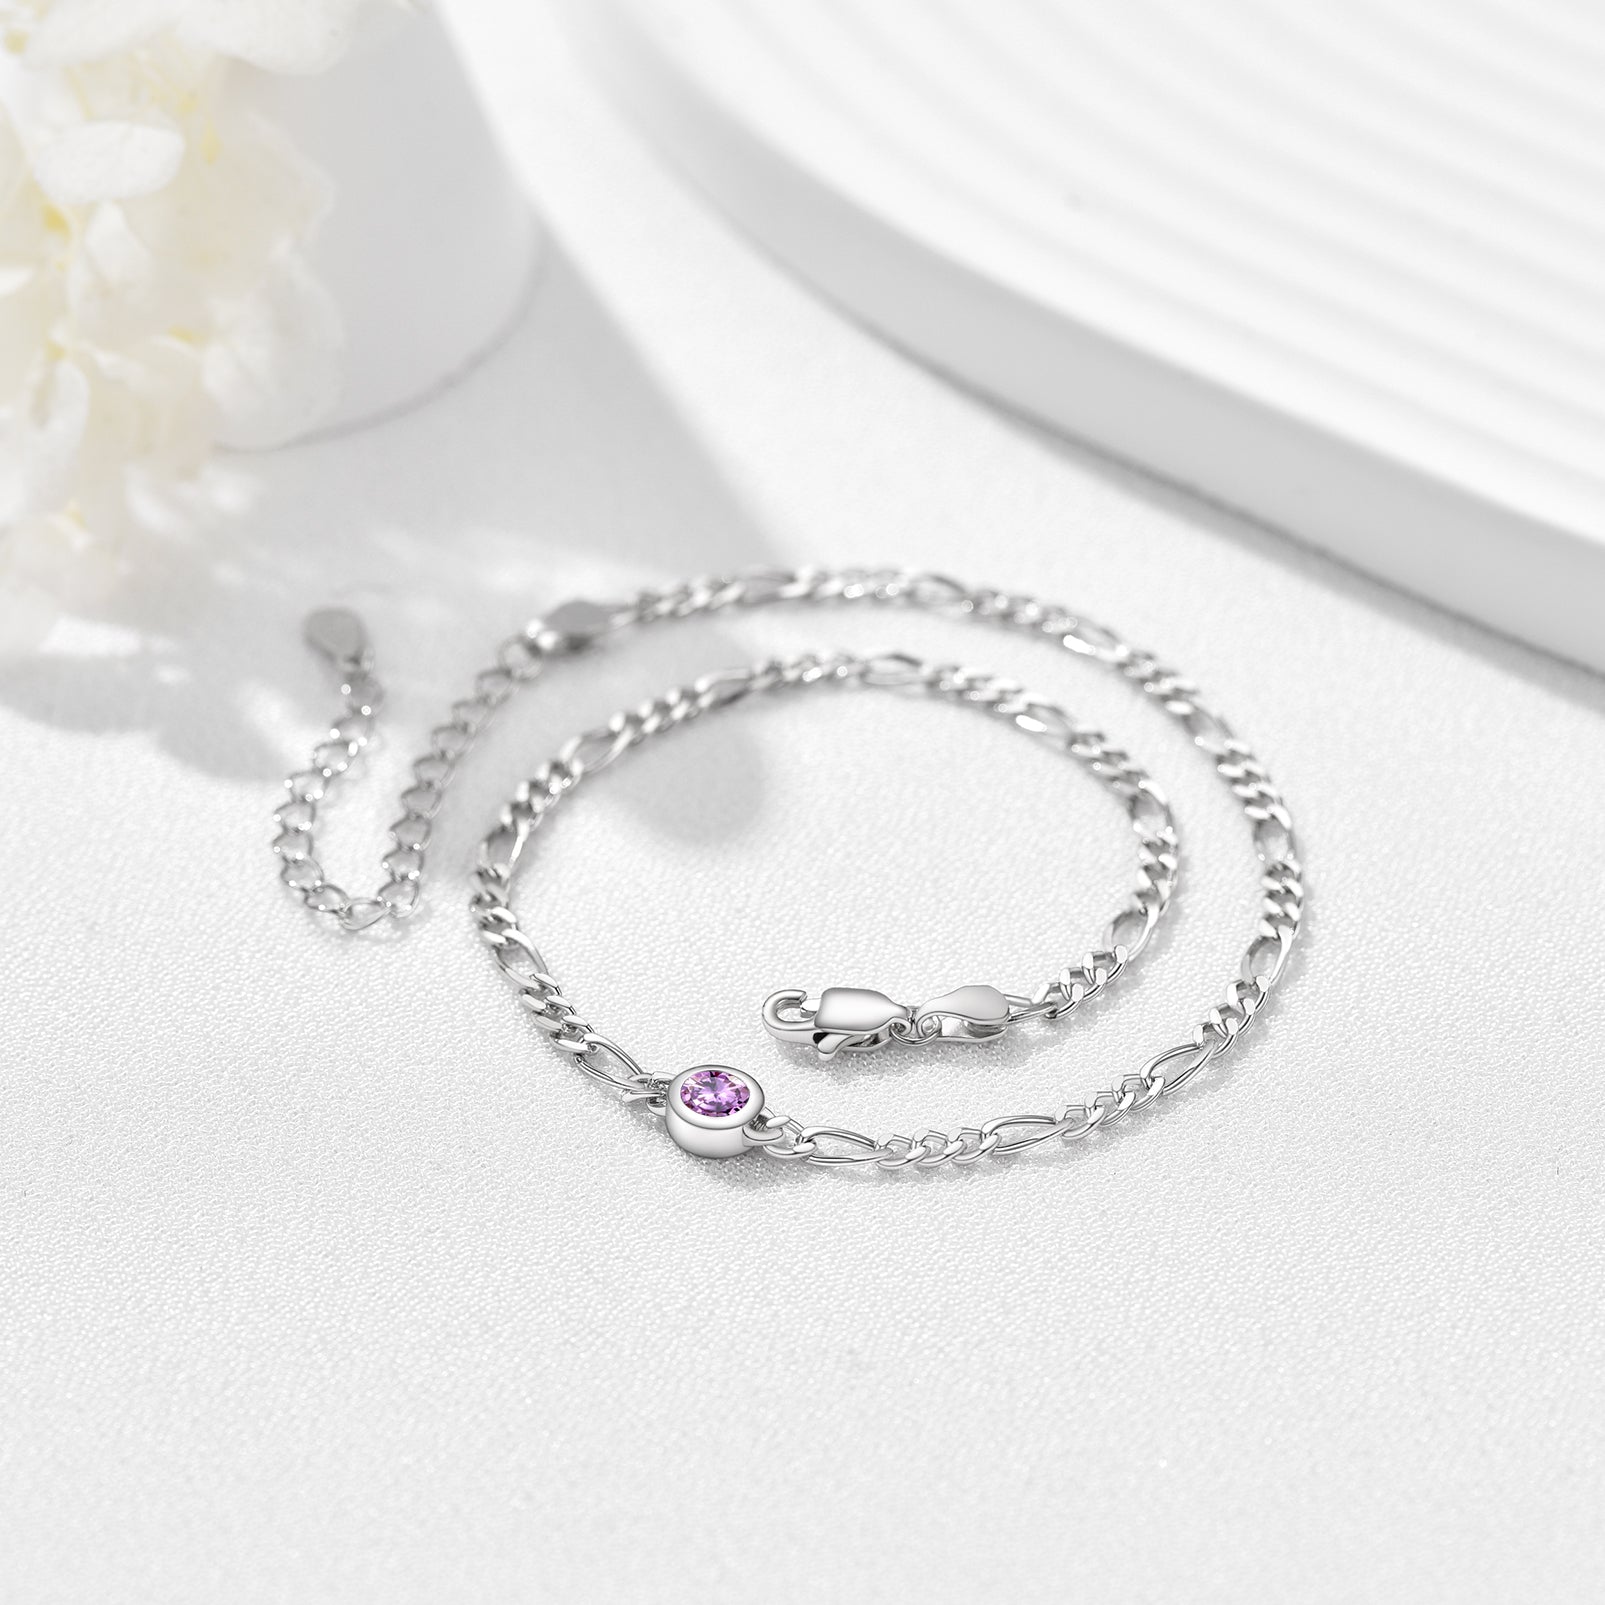 Birthstones Jewelry silver anklets for women